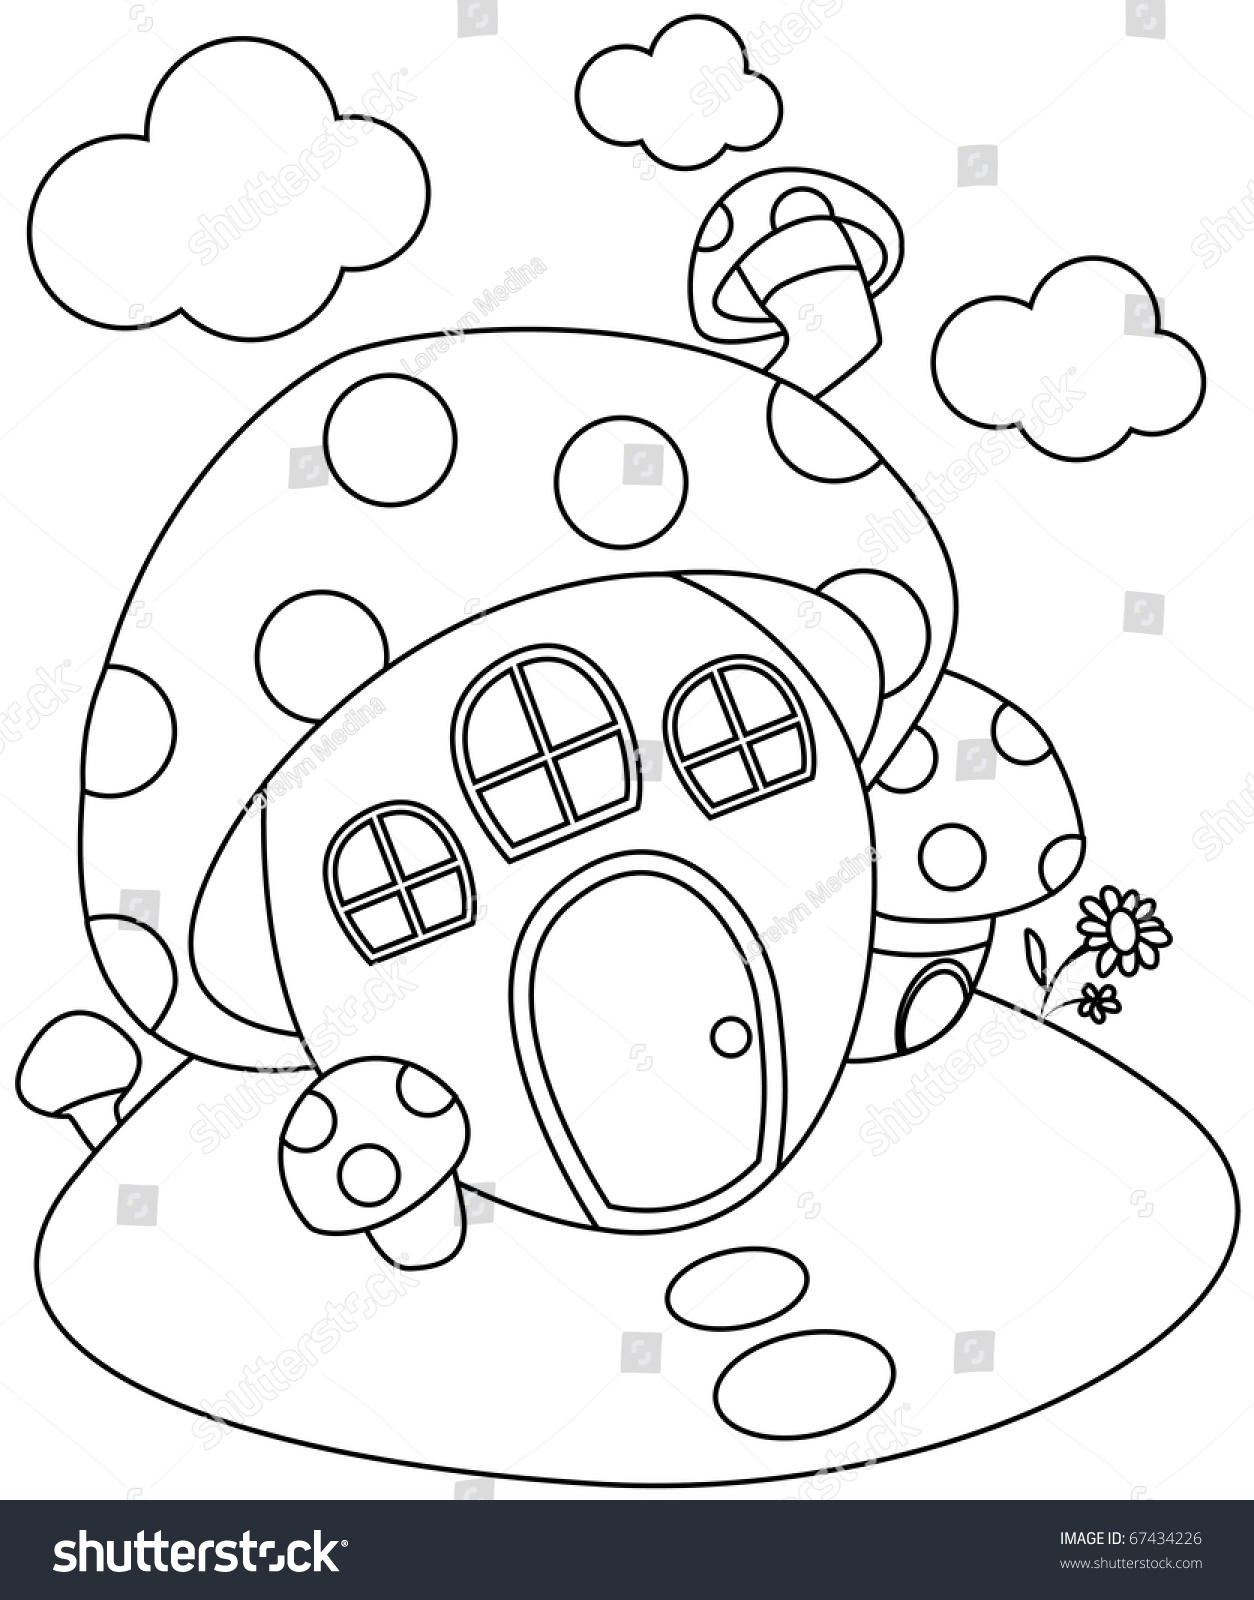 Line Art Illustration Of A Mushroom-Shaped House (Coloring Page